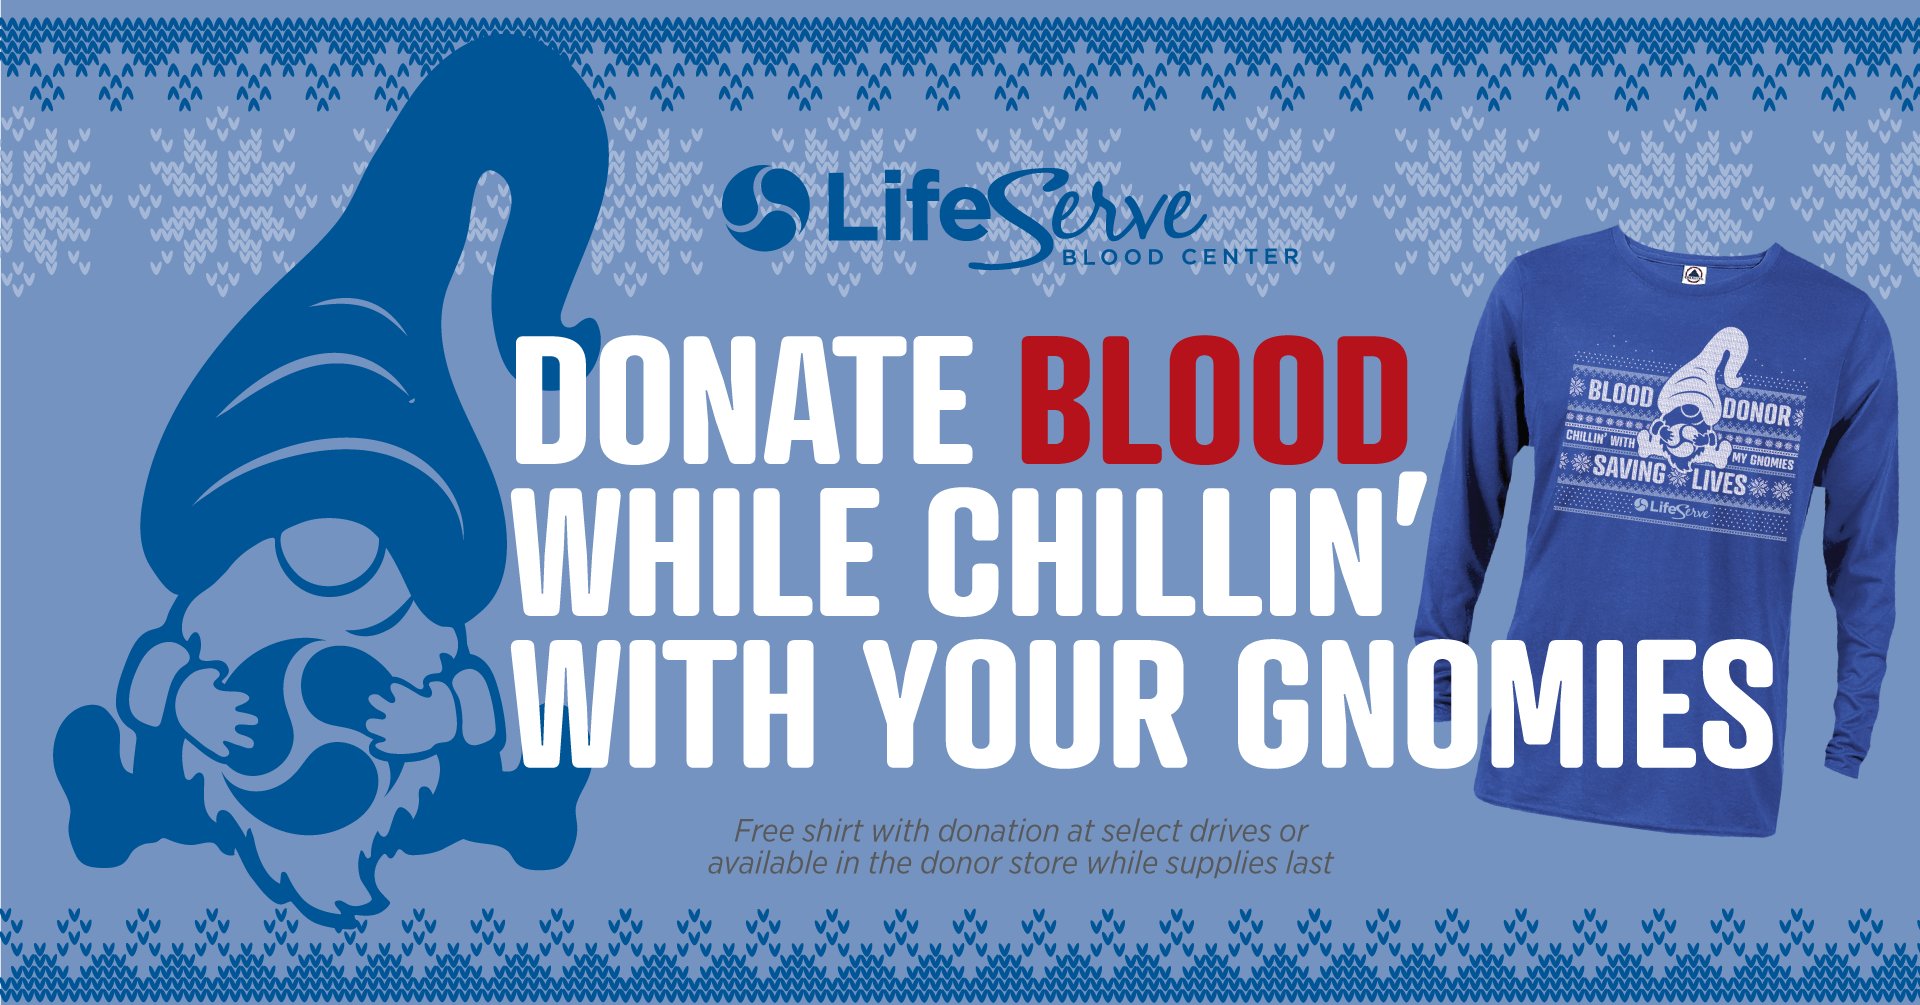 <h1 class="tribe-events-single-event-title">ALPHA MEDIA & LIFESERVE BLOOD CENTER BLOOD DRIVE</h1>